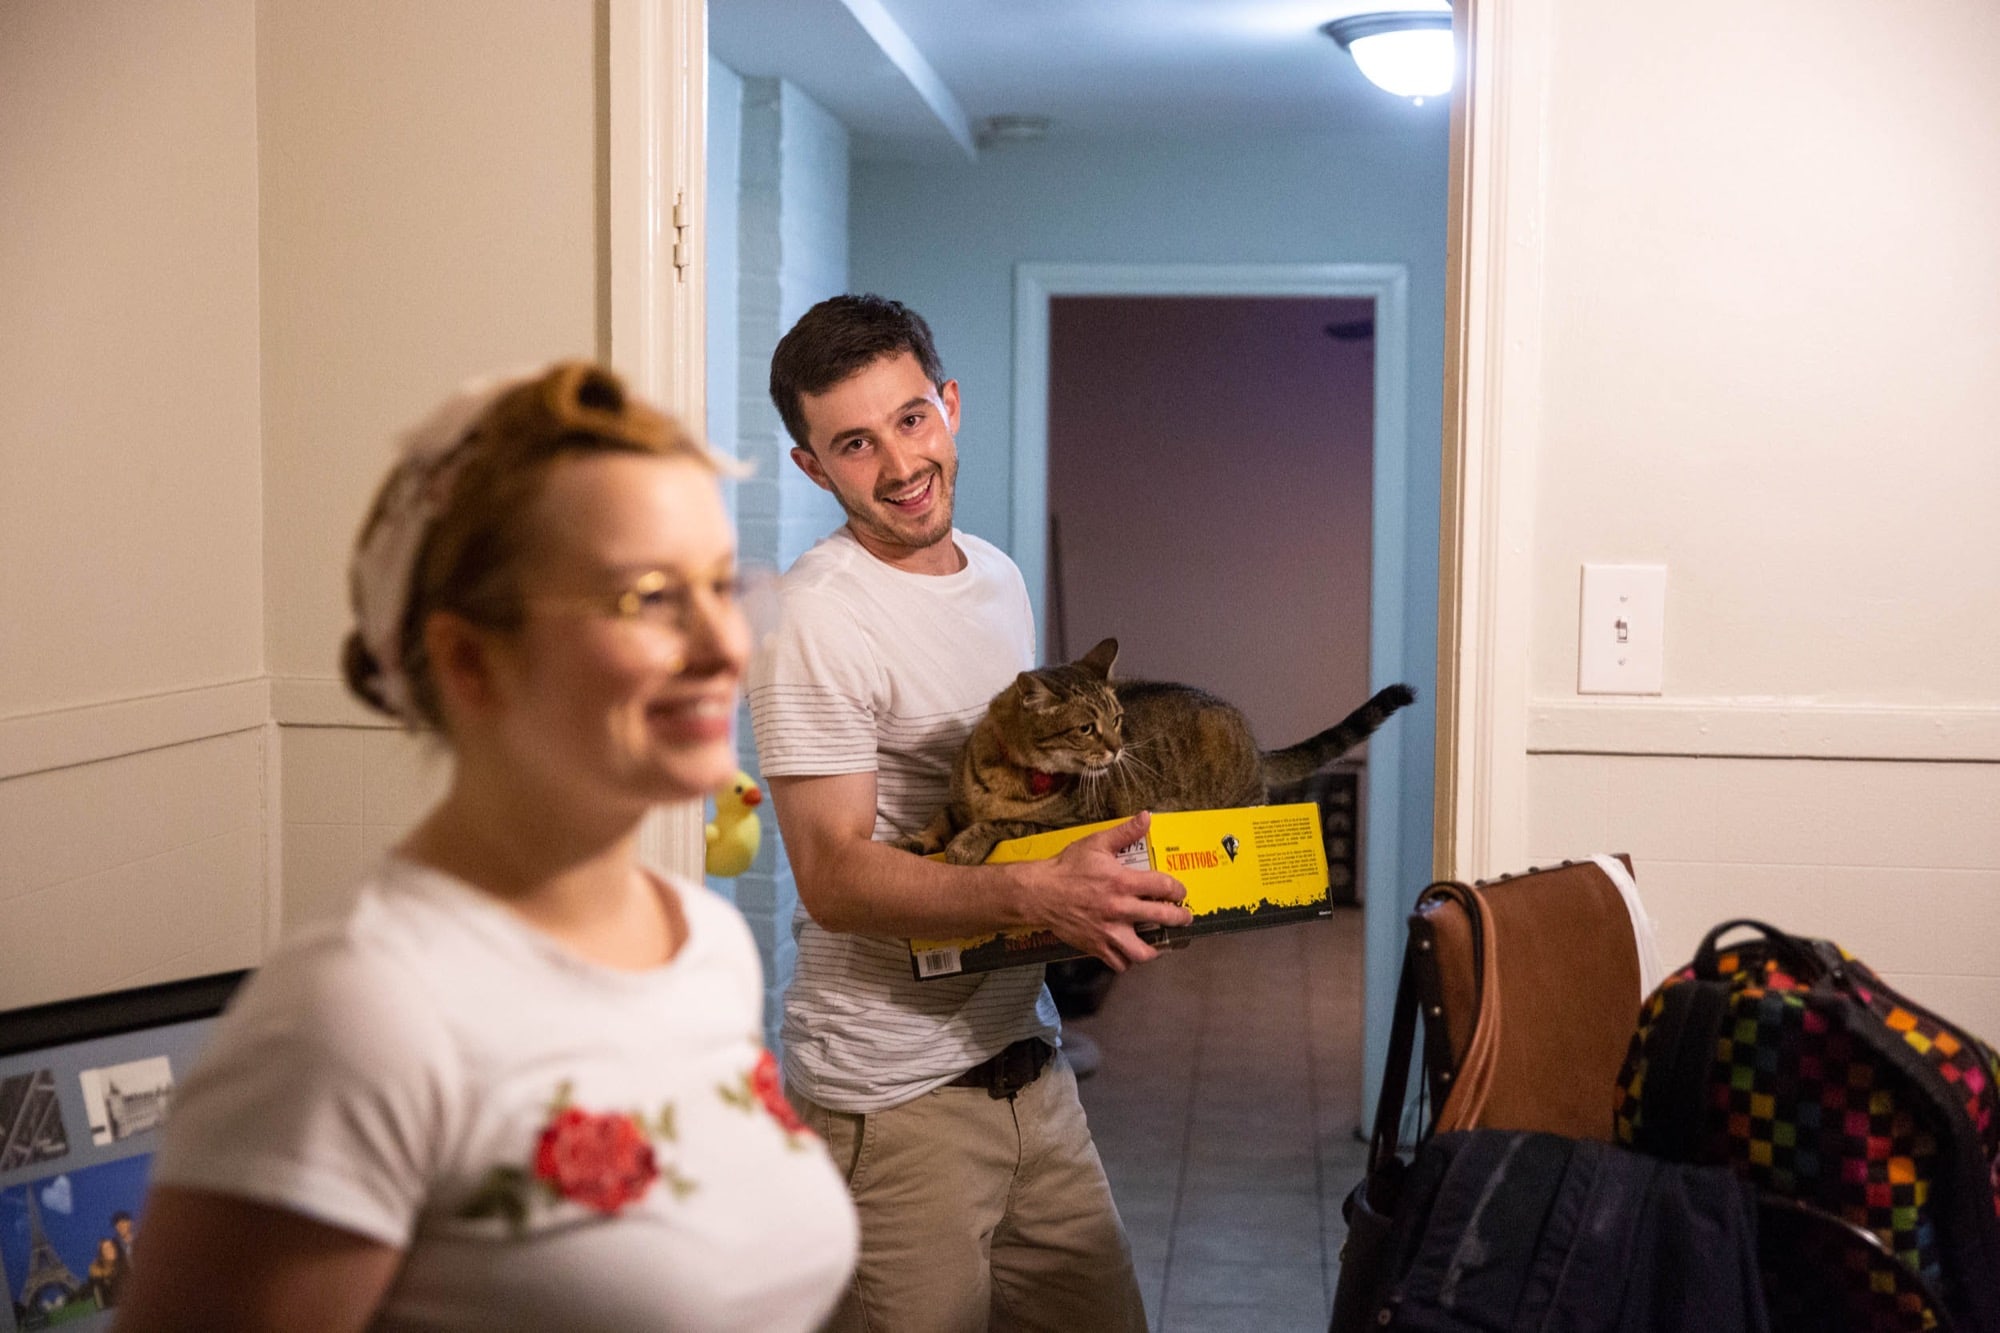 Megann Jones and her boyfriend, Ryan Becker, both lost their childhood homes to Hurricane Katrina. After the storm, he said, his parents bought a Nintendo Game Cube to keep him and his brother busy. (Ellen O'Brien/News21)